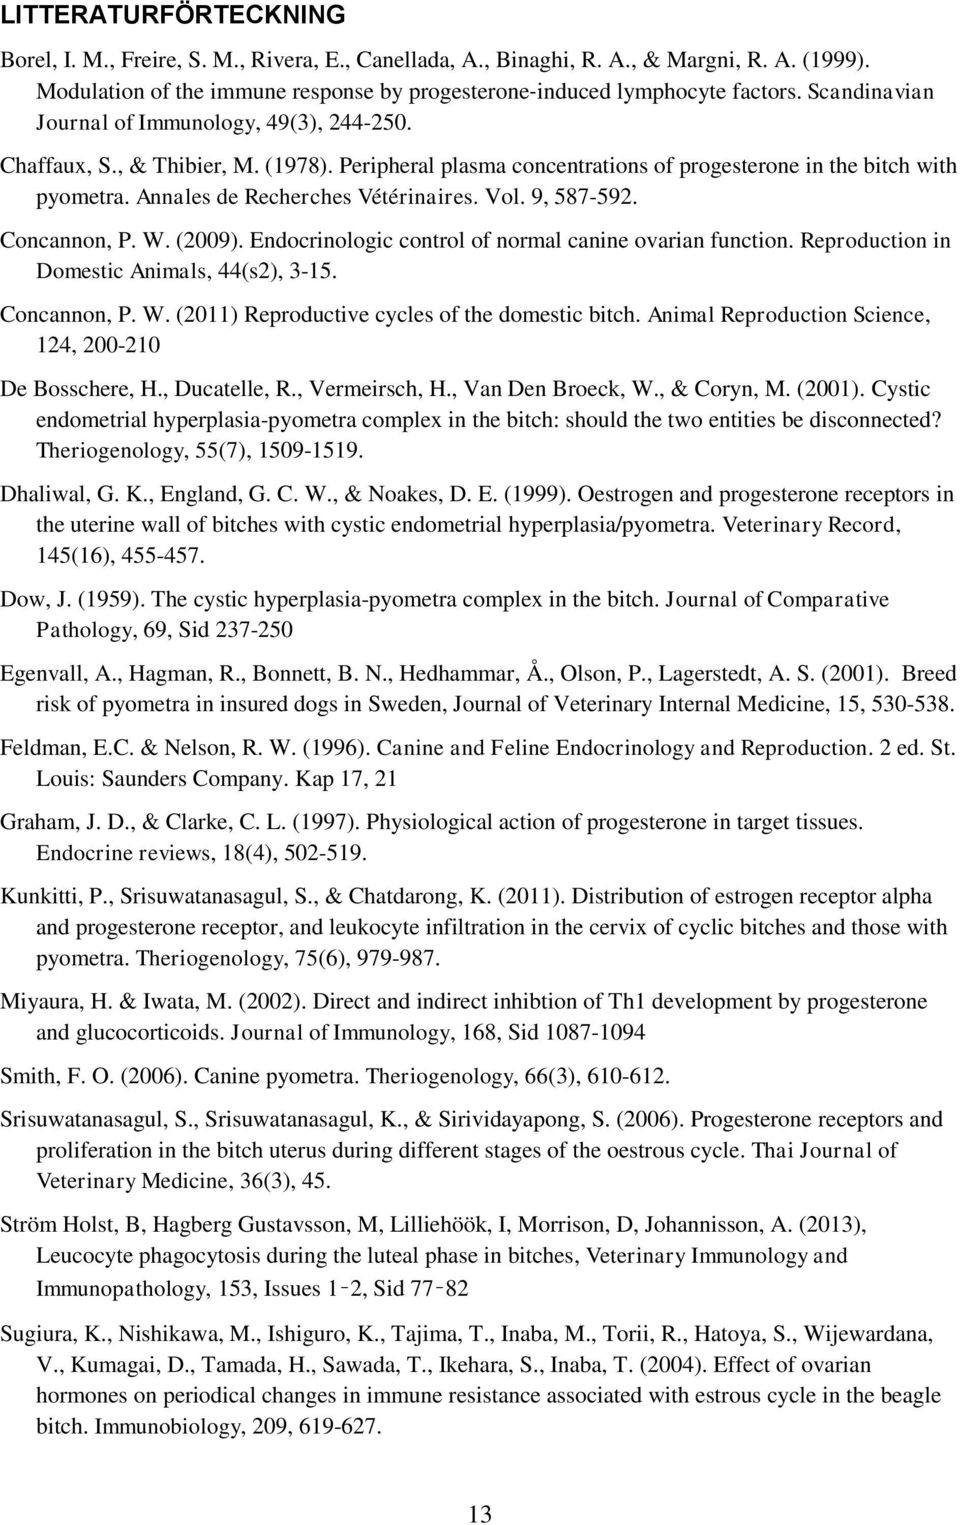 Vol. 9, 587-592. Concannon, P. W. (2009). Endocrinologic control of normal canine ovarian function. Reproduction in Domestic Animals, 44(s2), 3-15. Concannon, P. W. (2011) Reproductive cycles of the domestic bitch.